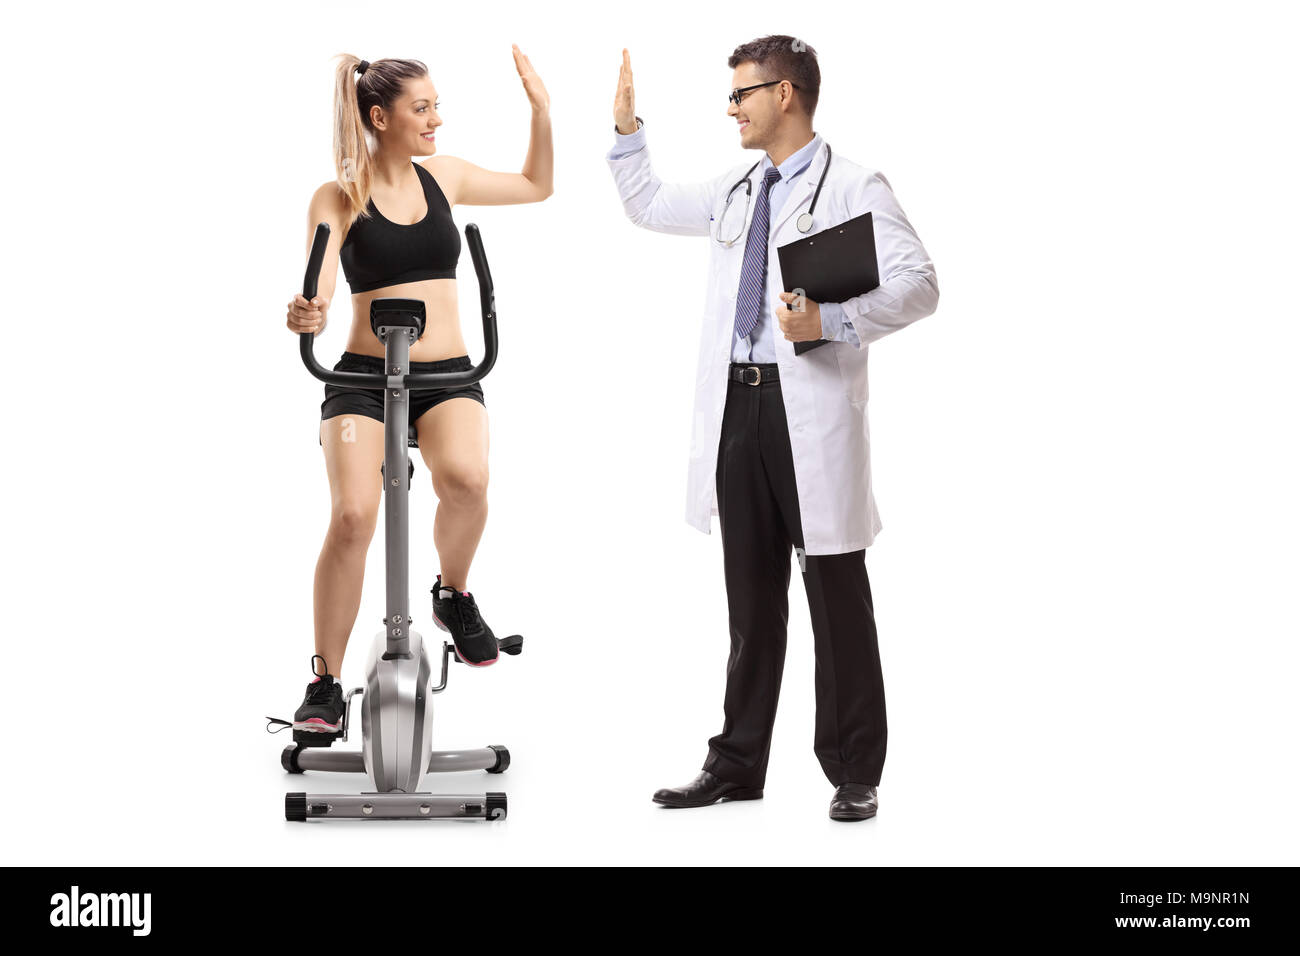 Young woman exercising on a stationary bike and high-fiving a doctor isolated on white background Stock Photo